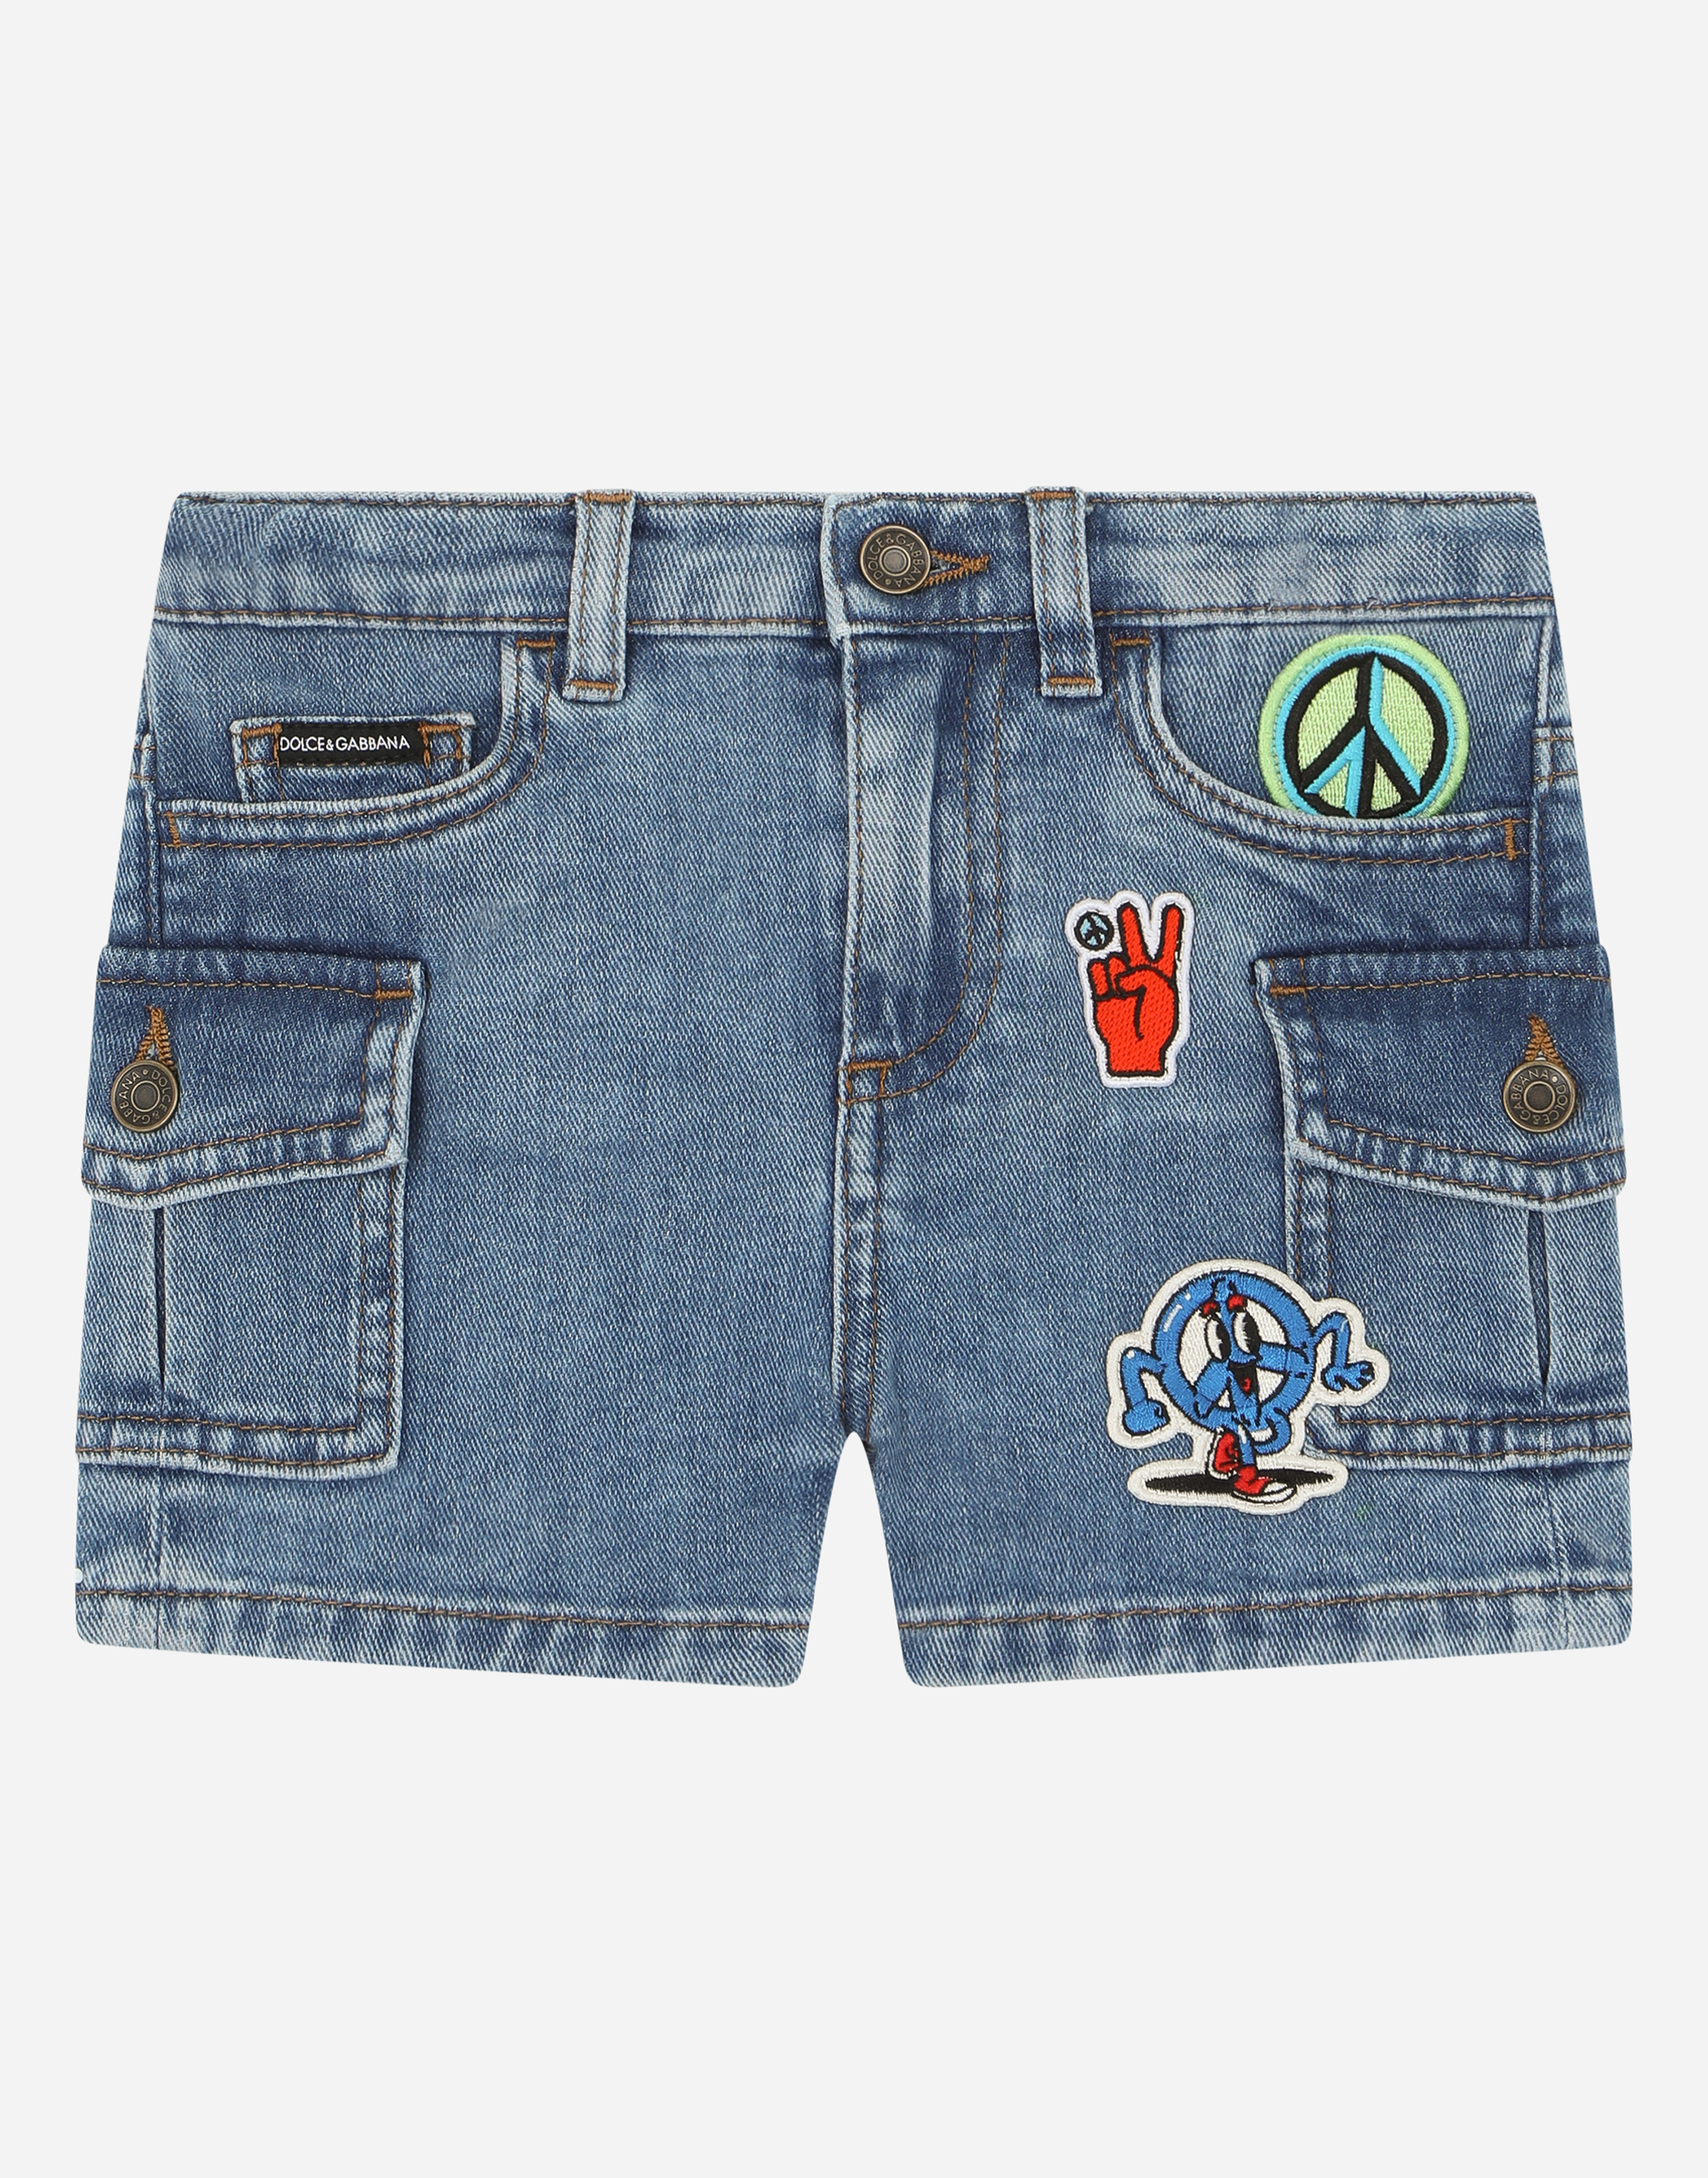 DOLCE & GABBANA STRETCH DENIM SHORTS WITH DECORATIVE PATCHES